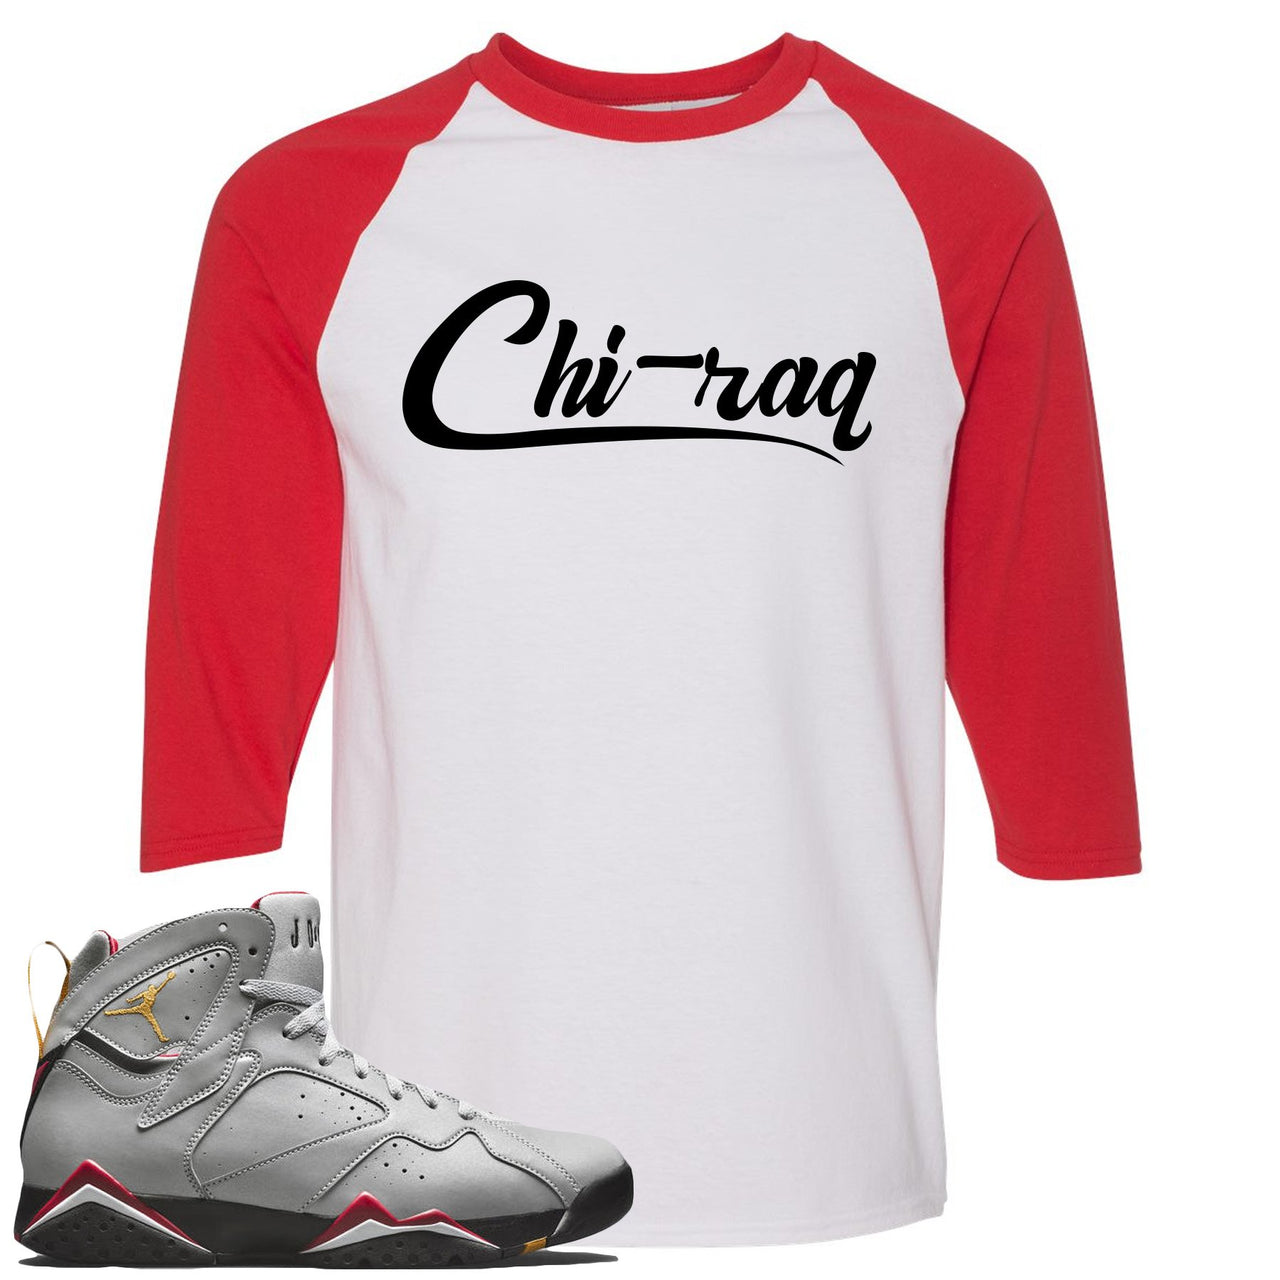 Reflections of a Champion 7s Raglan T Shirt | Chiraq Script, White and Red